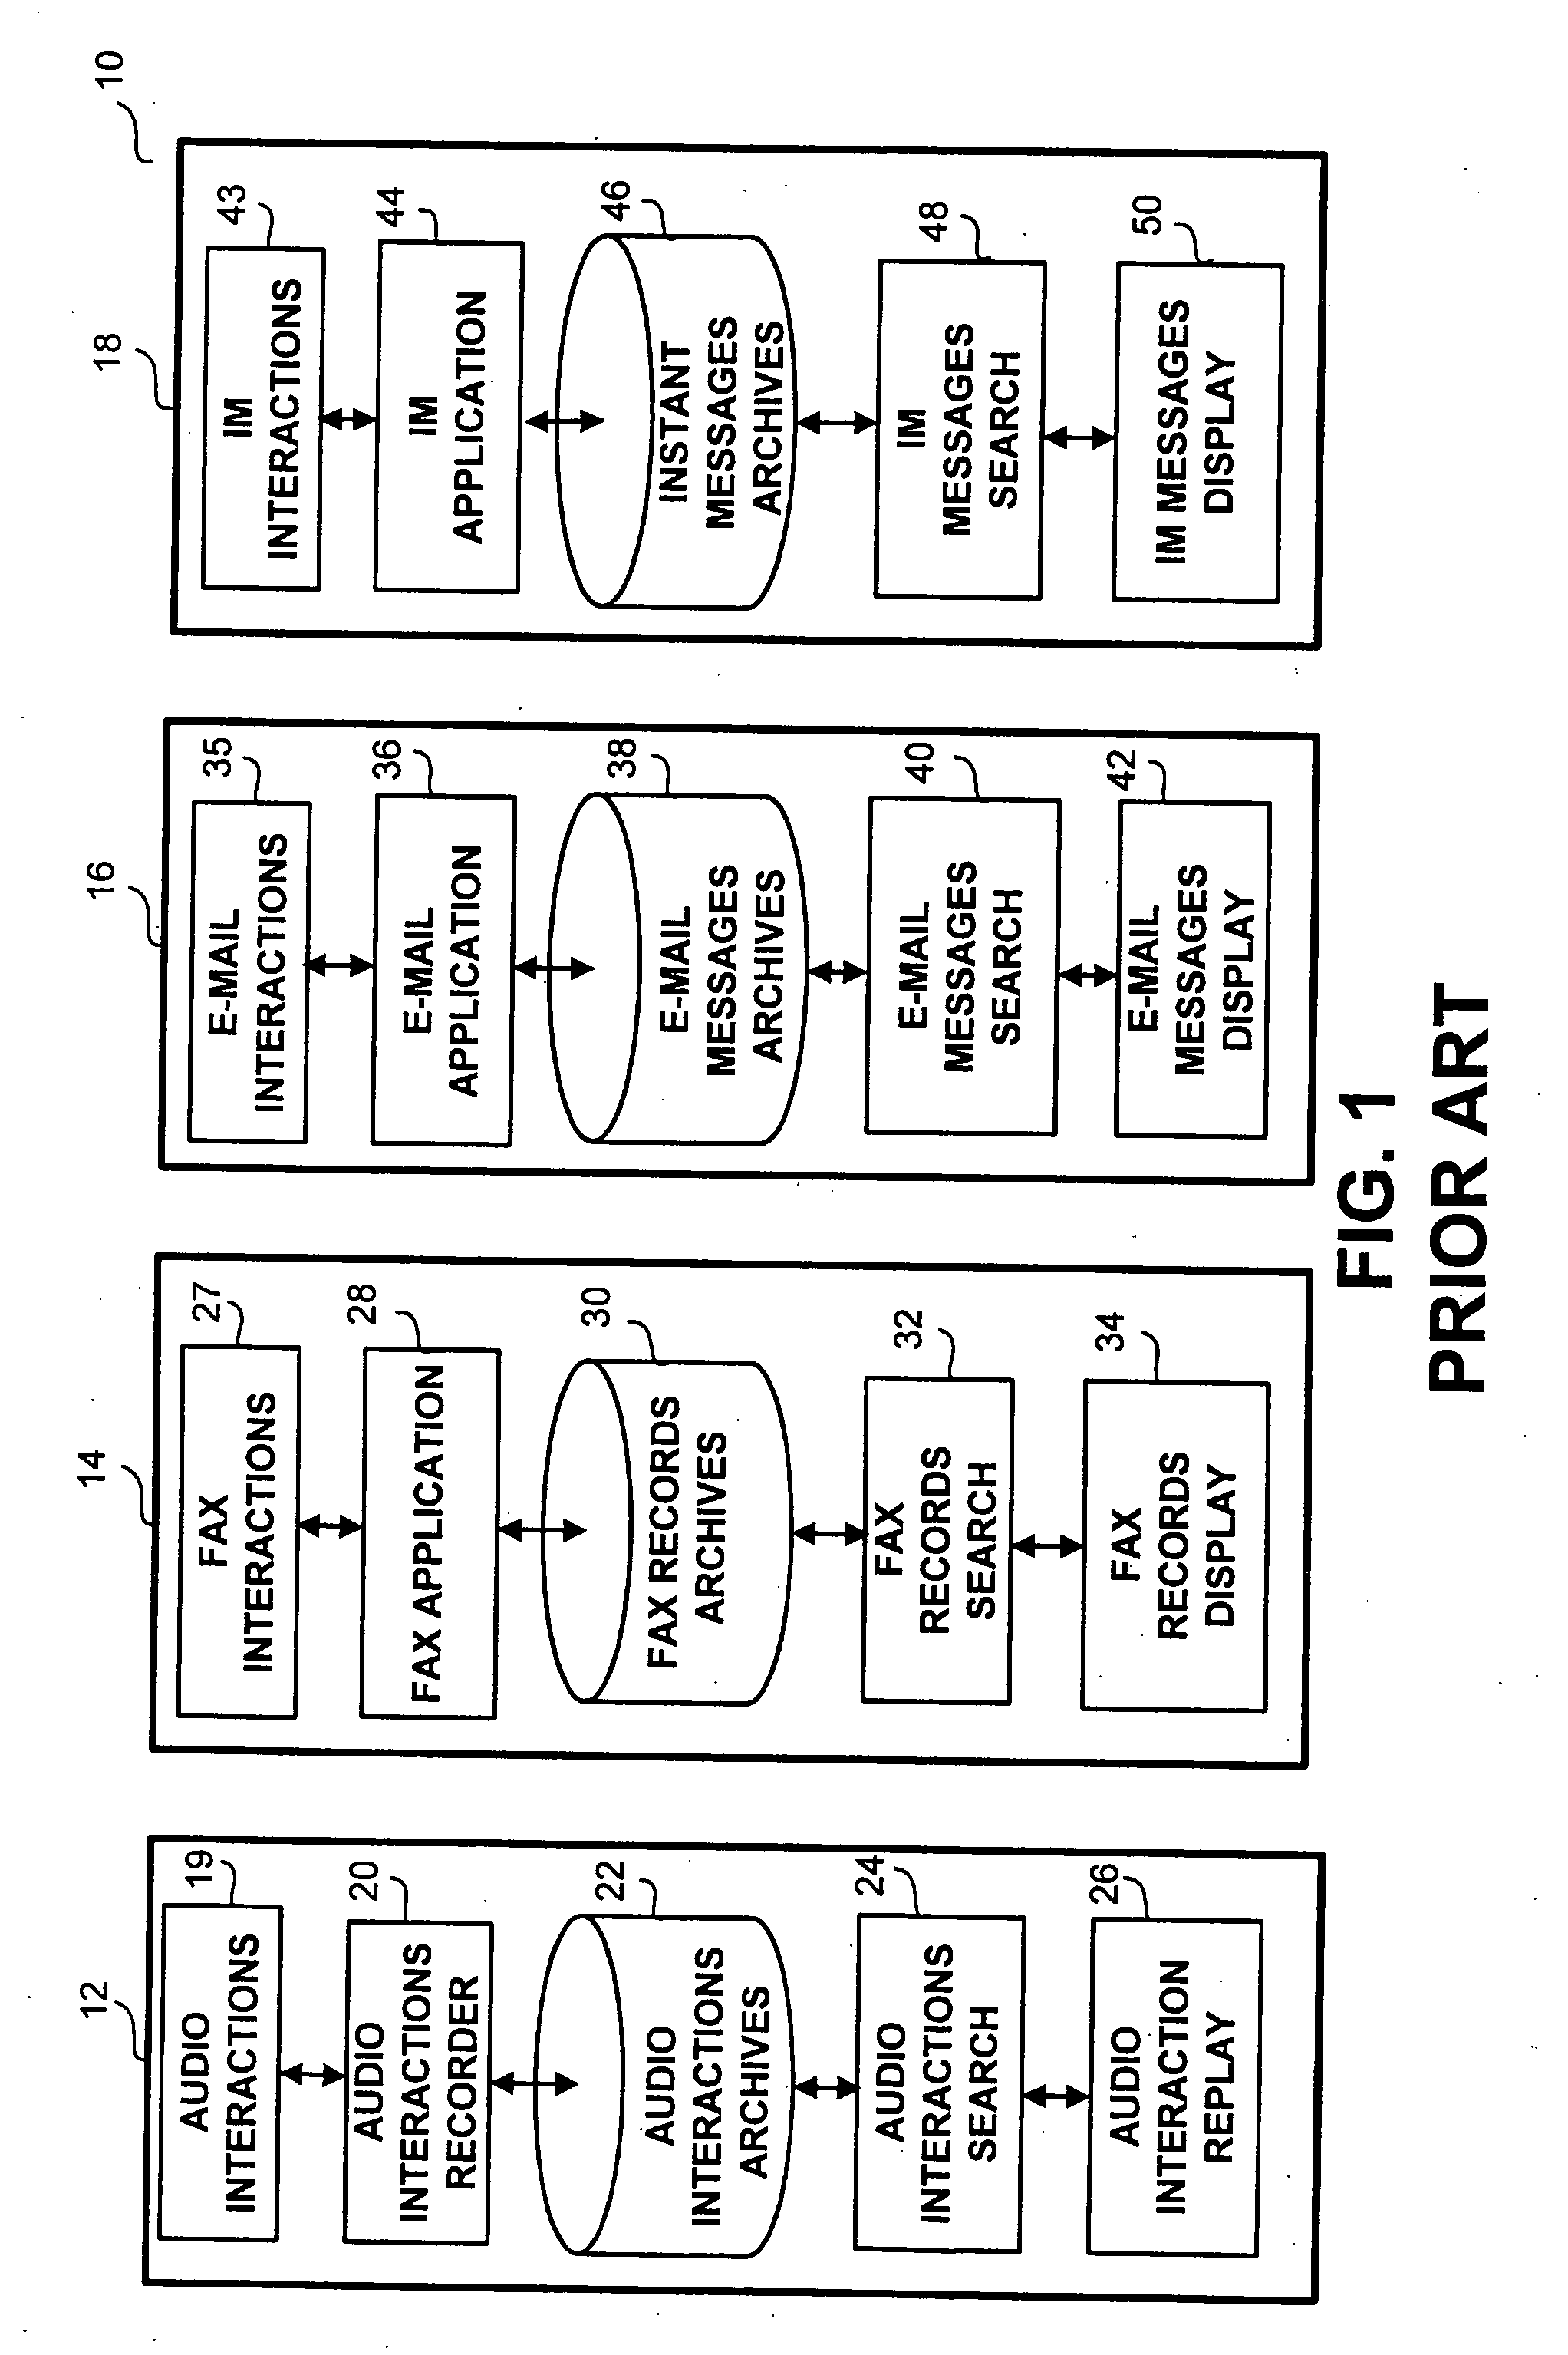 Apparatus, system and method for dispute resolution, regulation compliance and quality management in financial institutions